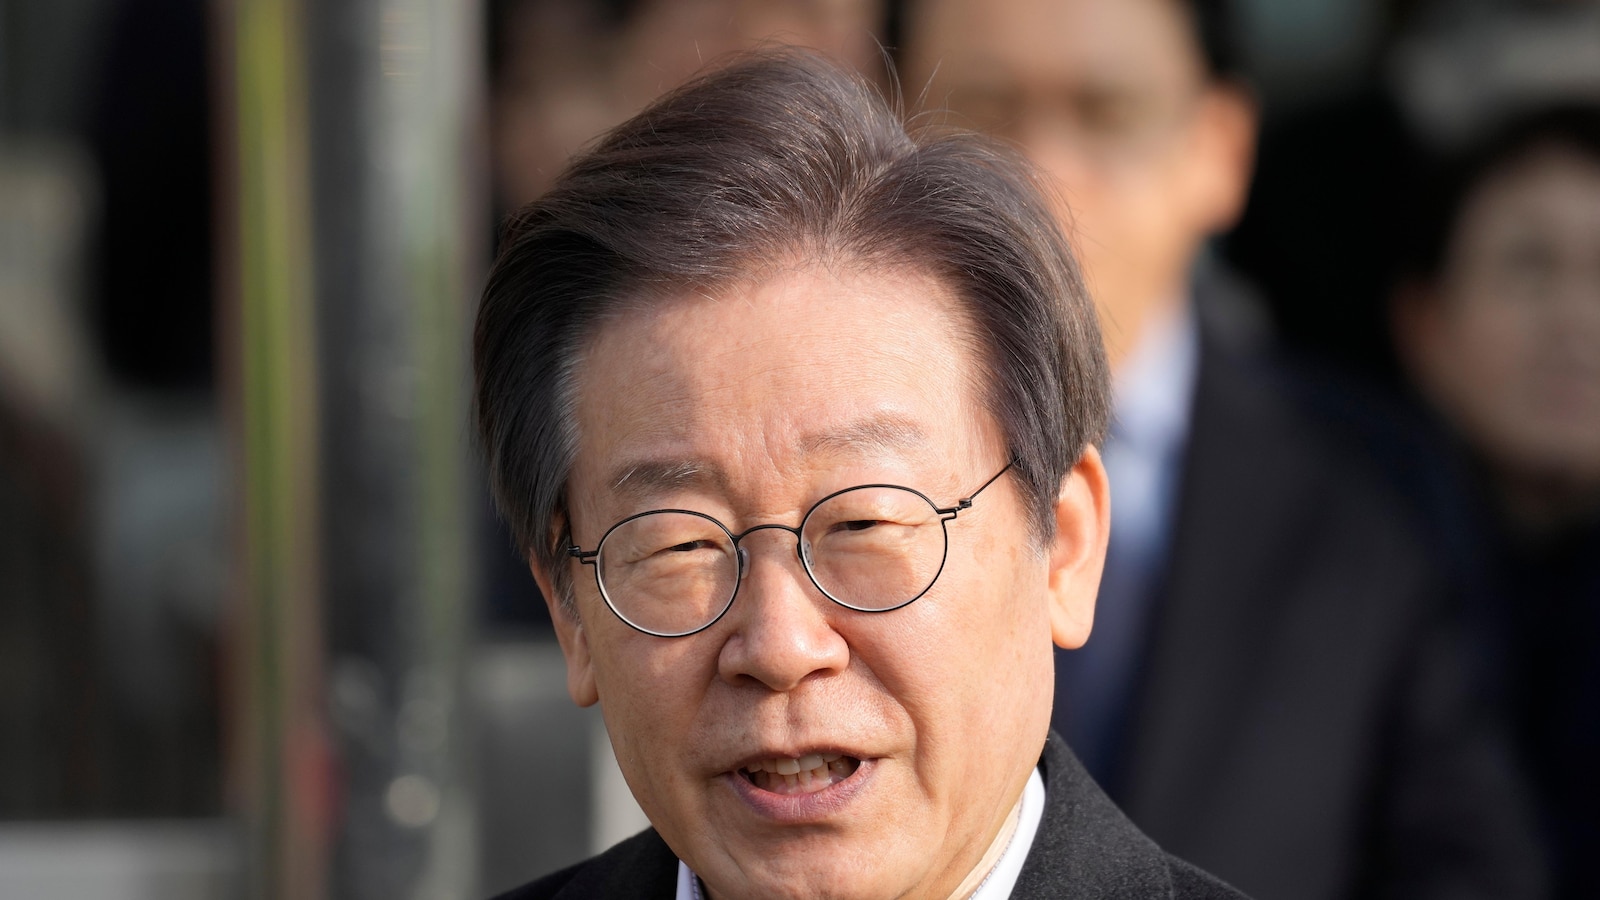 Opposition Leader in South Korea Discharged from Hospital One Week After Stabbing Incident